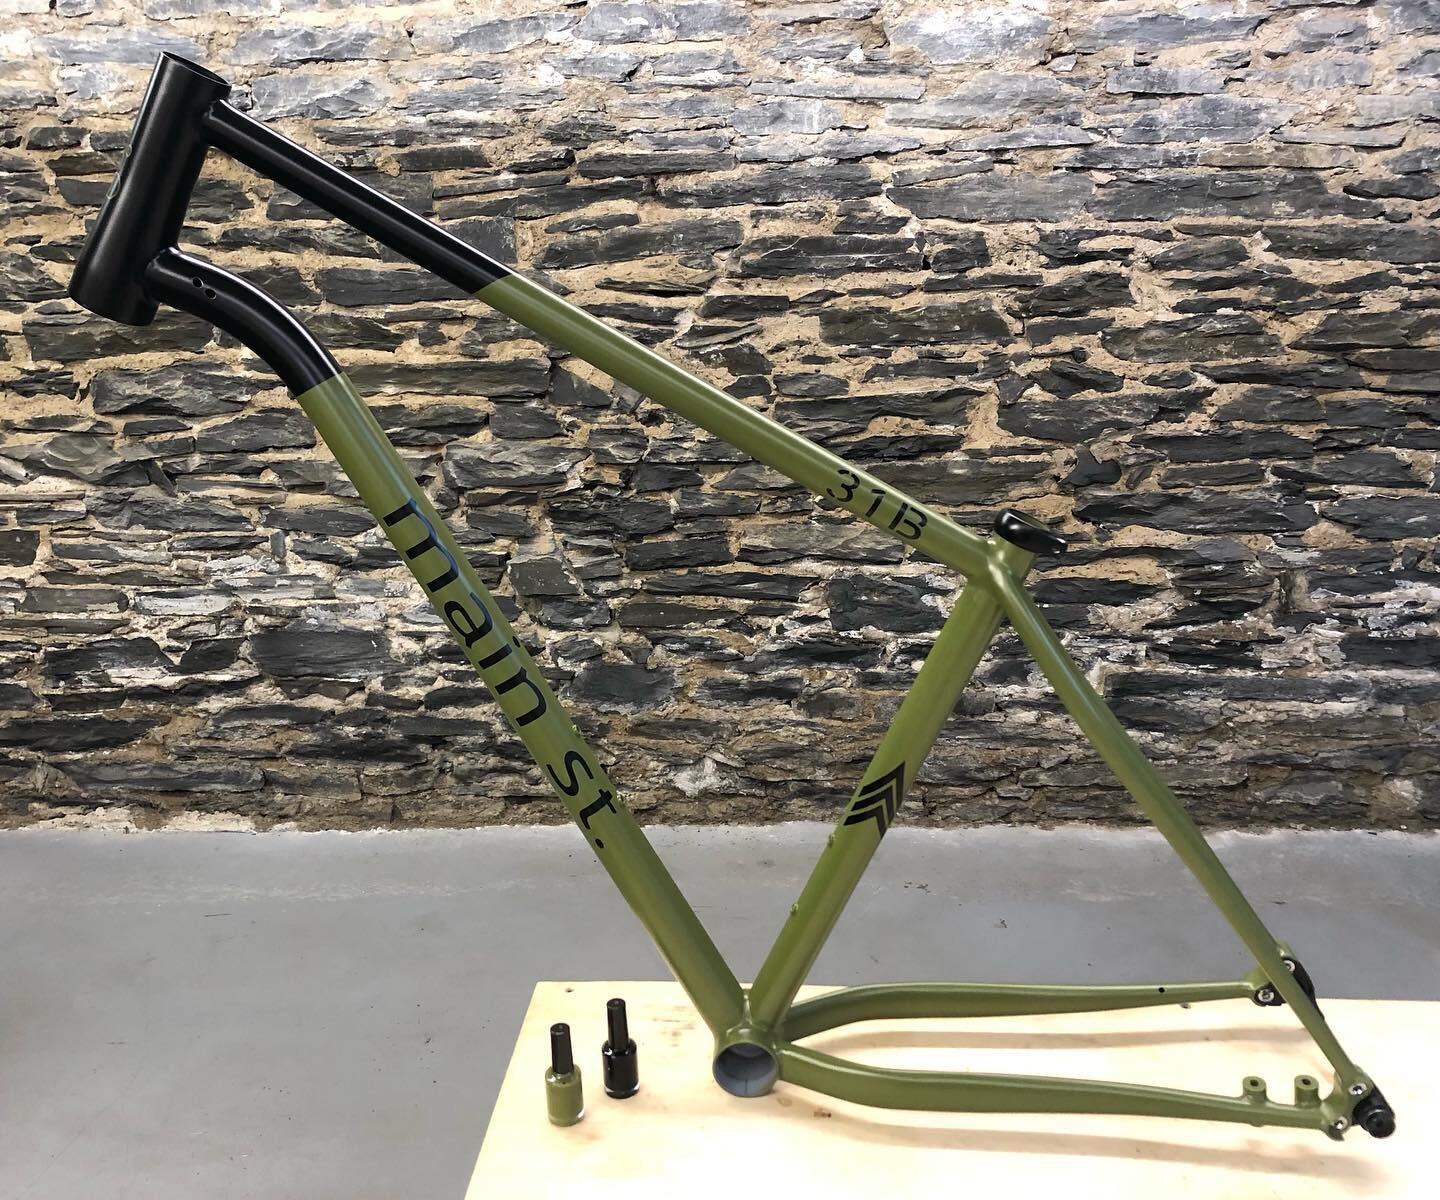 Another frame back from paint. 27.5x3 hardtail. #handbuiltbicycle #columbuszona #steelmtb #steelisreal #columbus_official #custombicycle #framebuildersupply #novabicyclesupply #garrettsbrewing